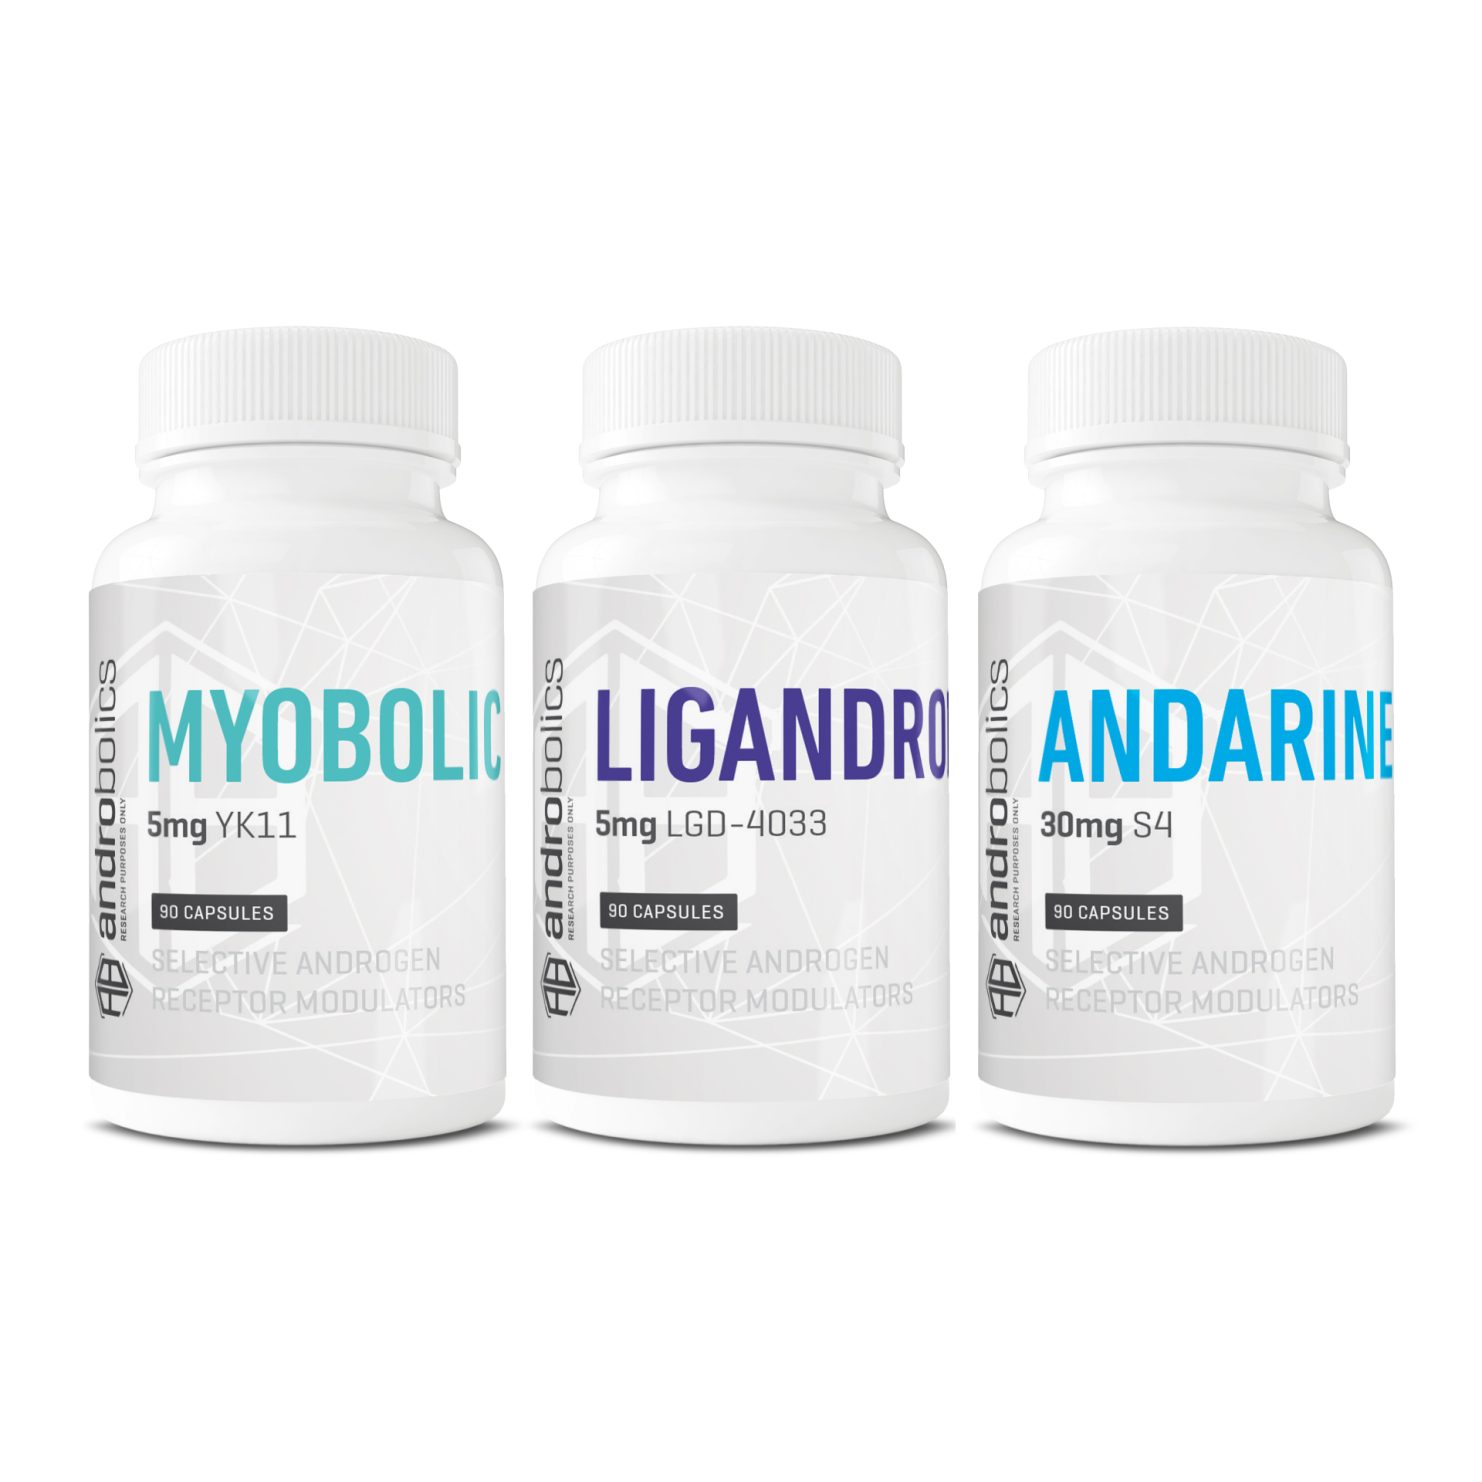 Strength-Boosting SARMs Stack with Ligandrol, Andarine, and Myobolic bottles from Androbolics.